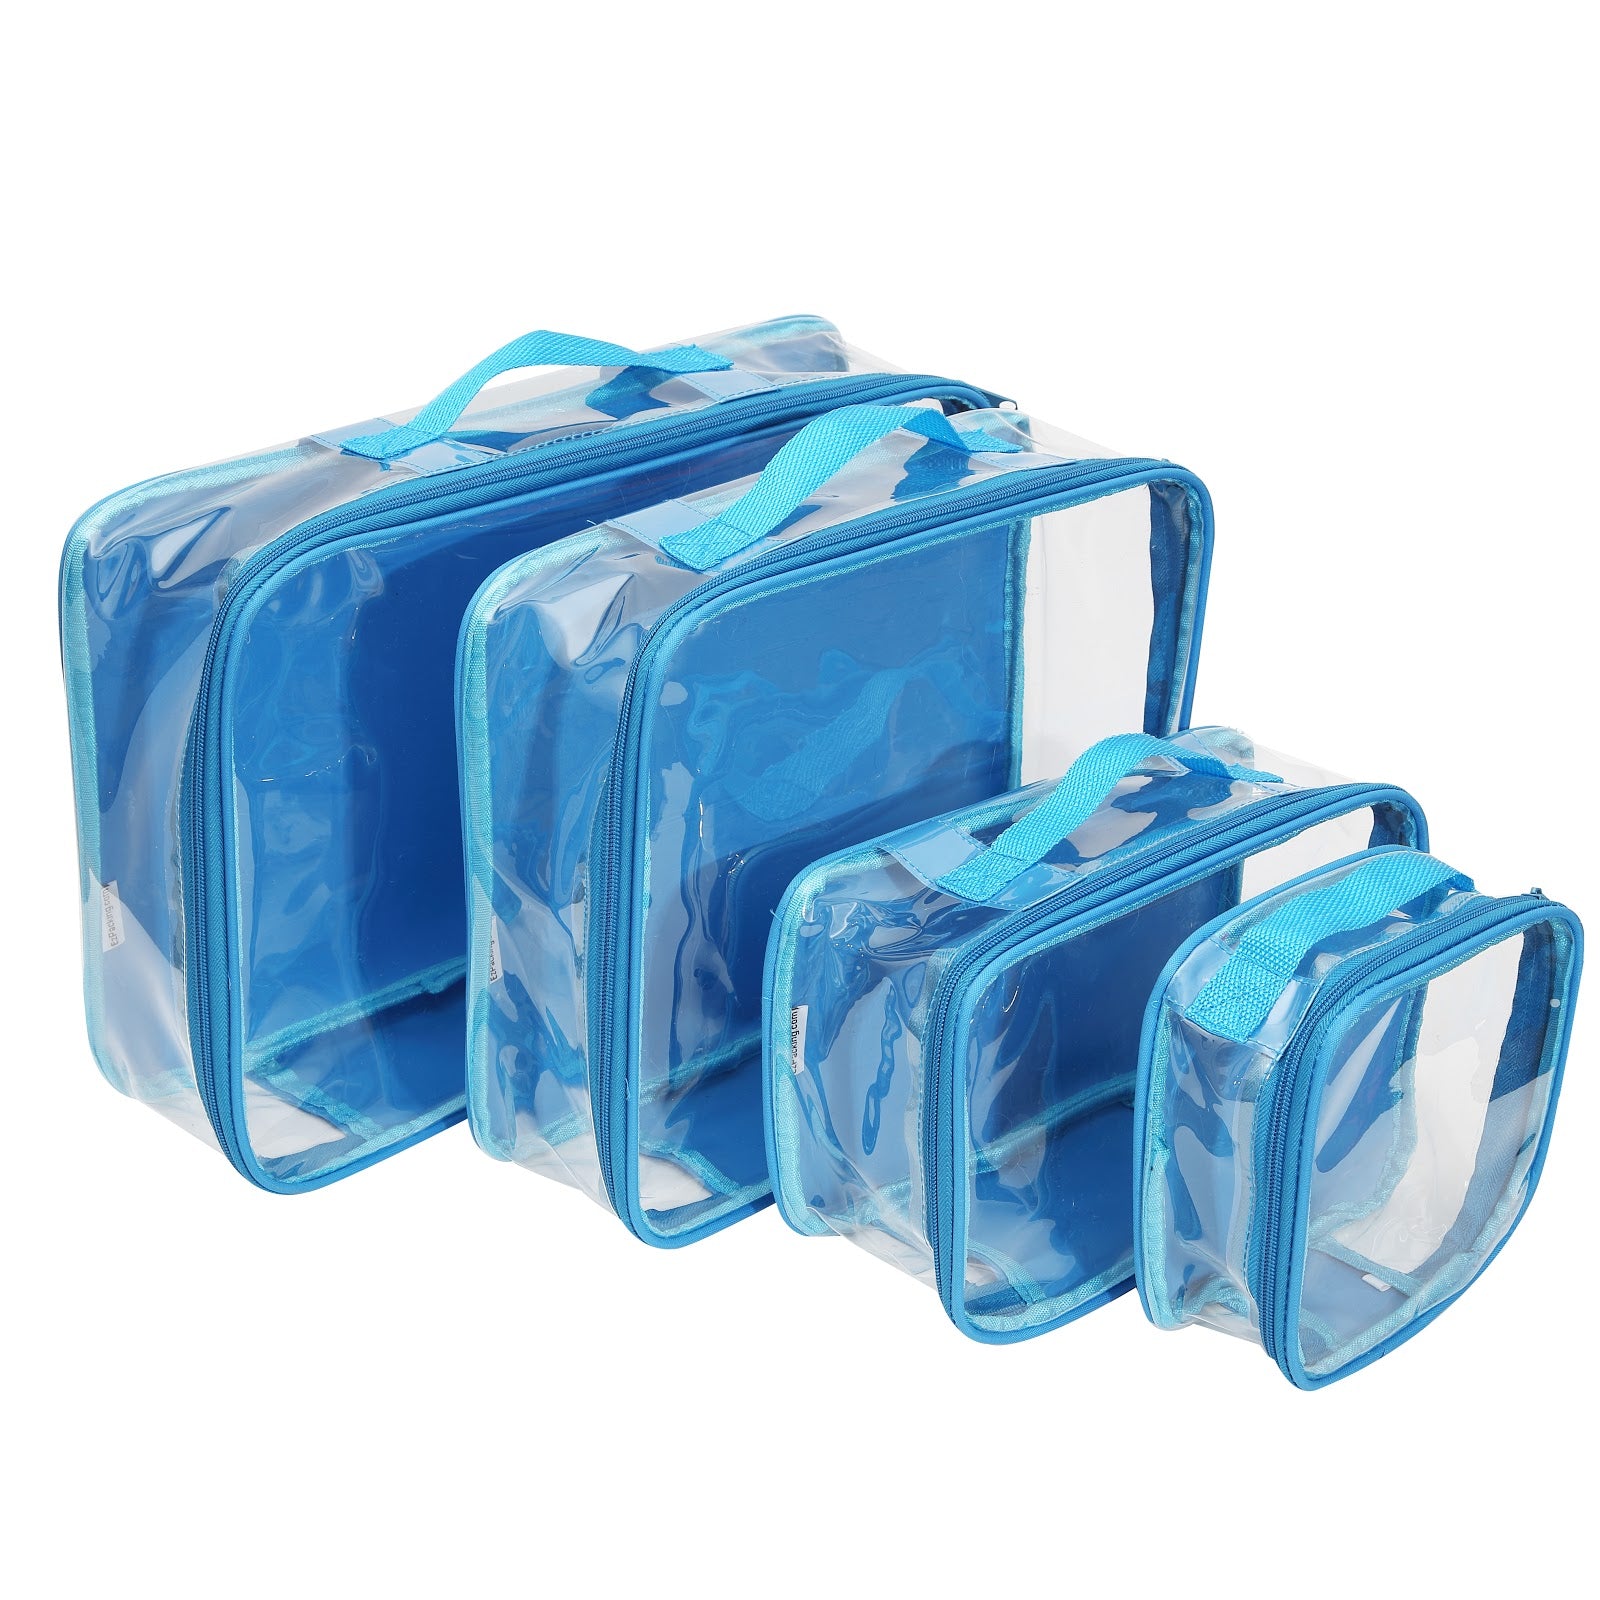 Turquoise packing cubes for travel backpack